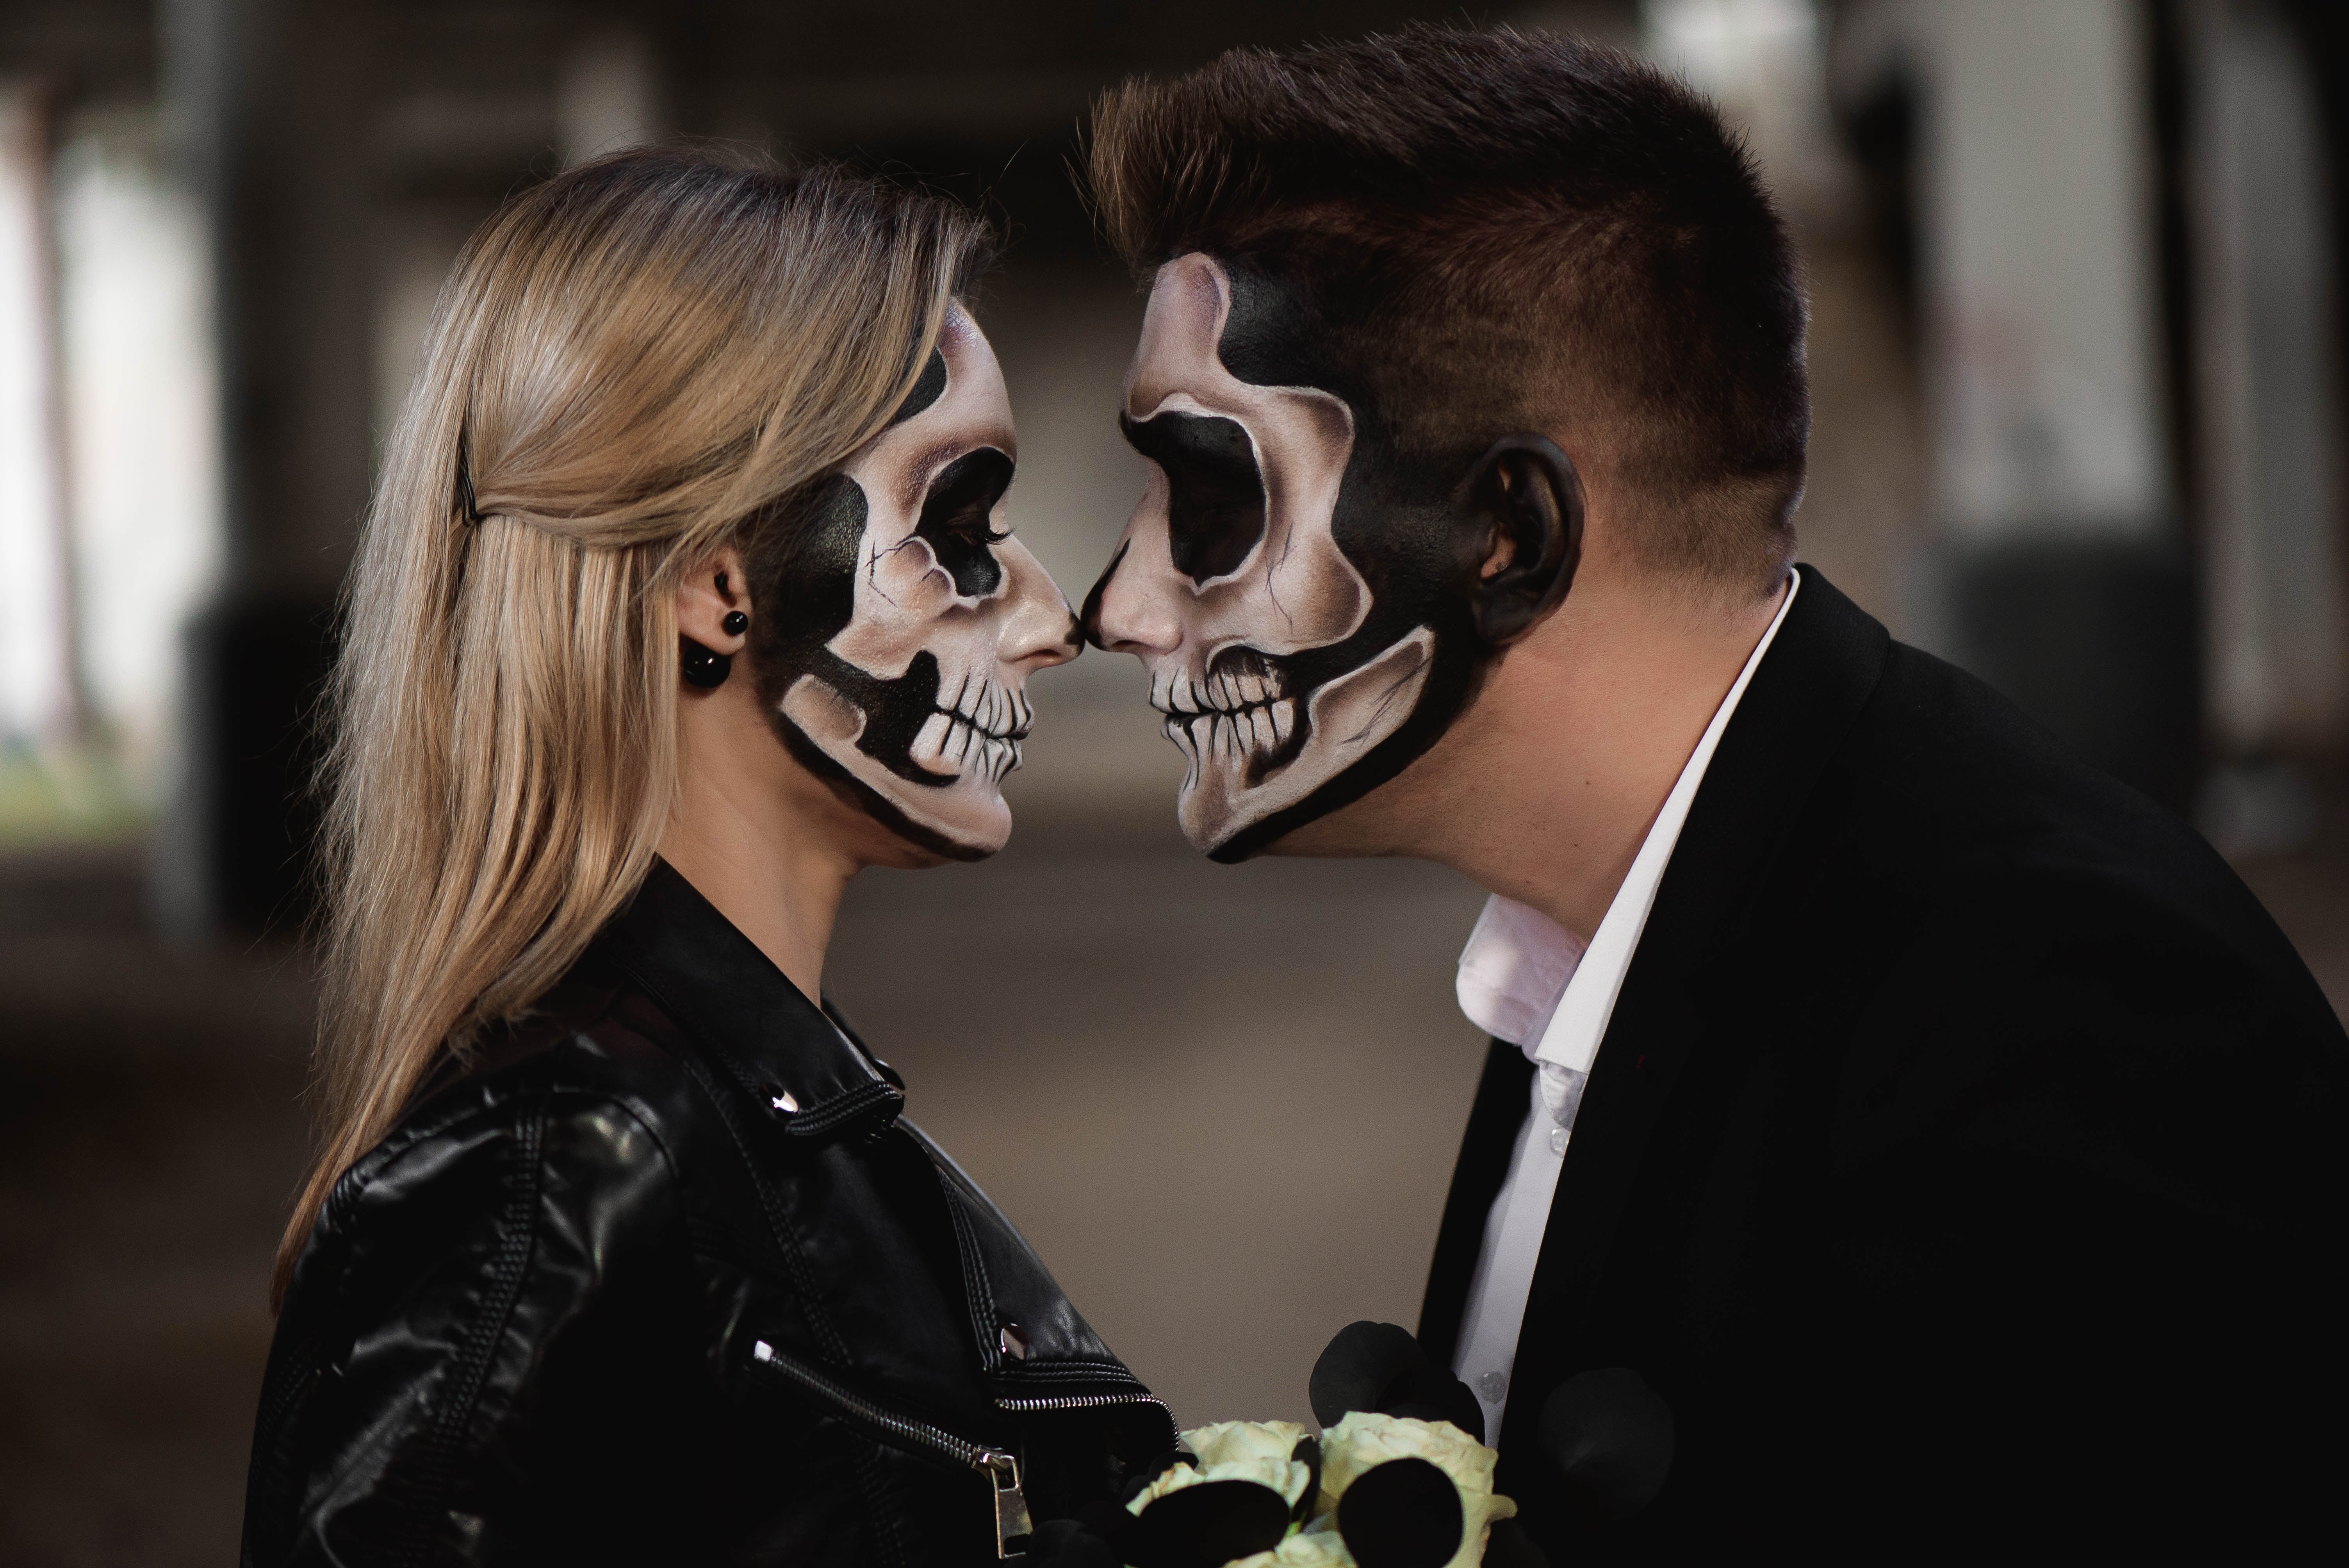 DIY Couples Costumes For Halloween That Are Actually Pretty Clever